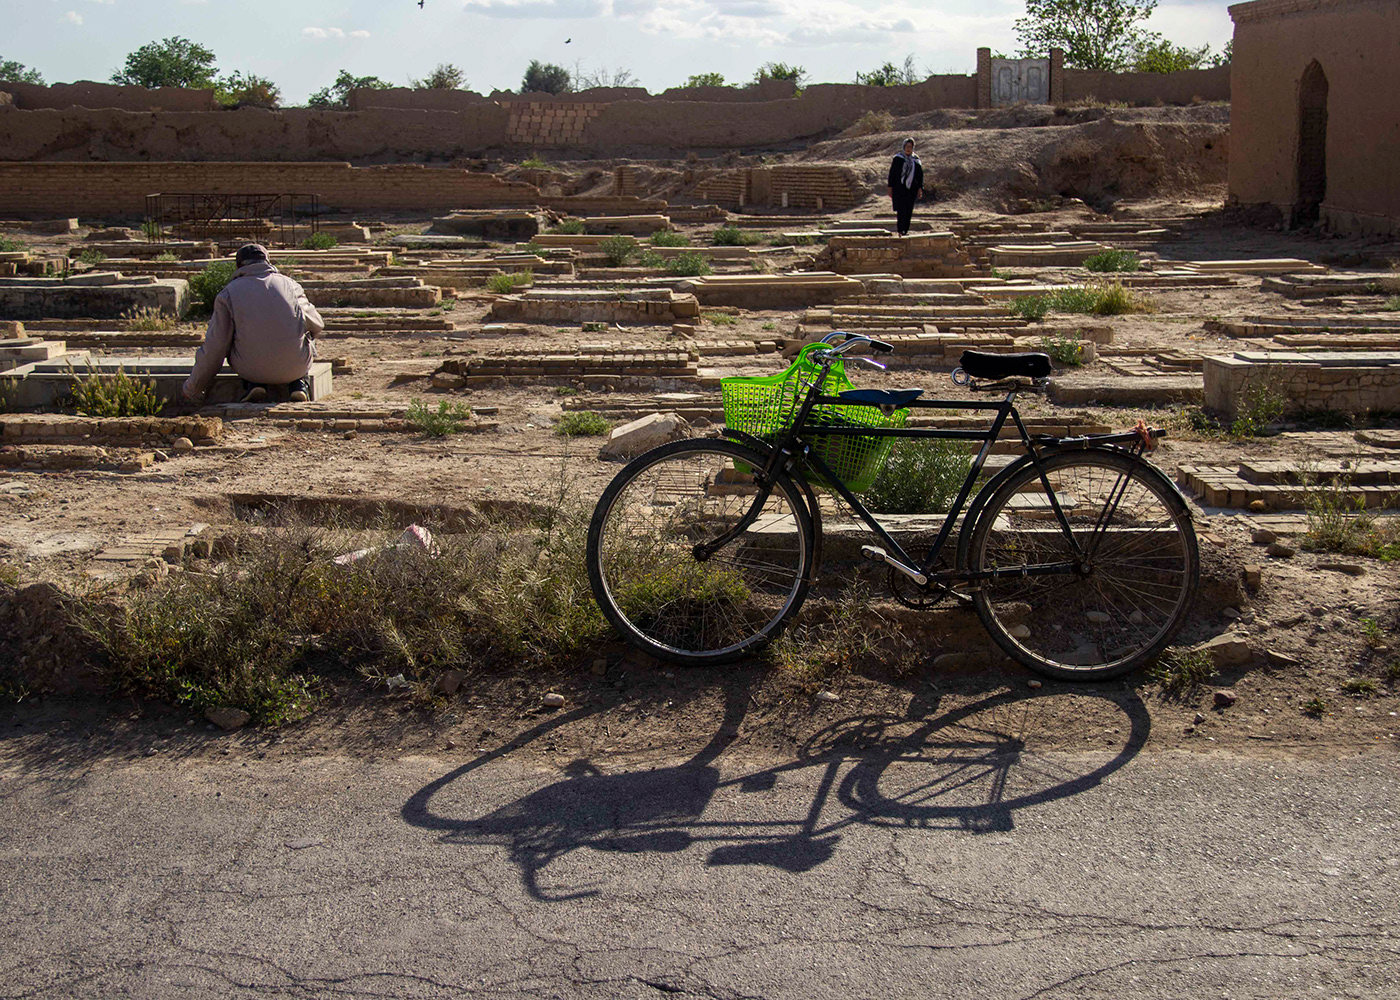 Bicycle Bike dacumentry dacumentry photography daily shots Iran photo Photography  Street street_photography